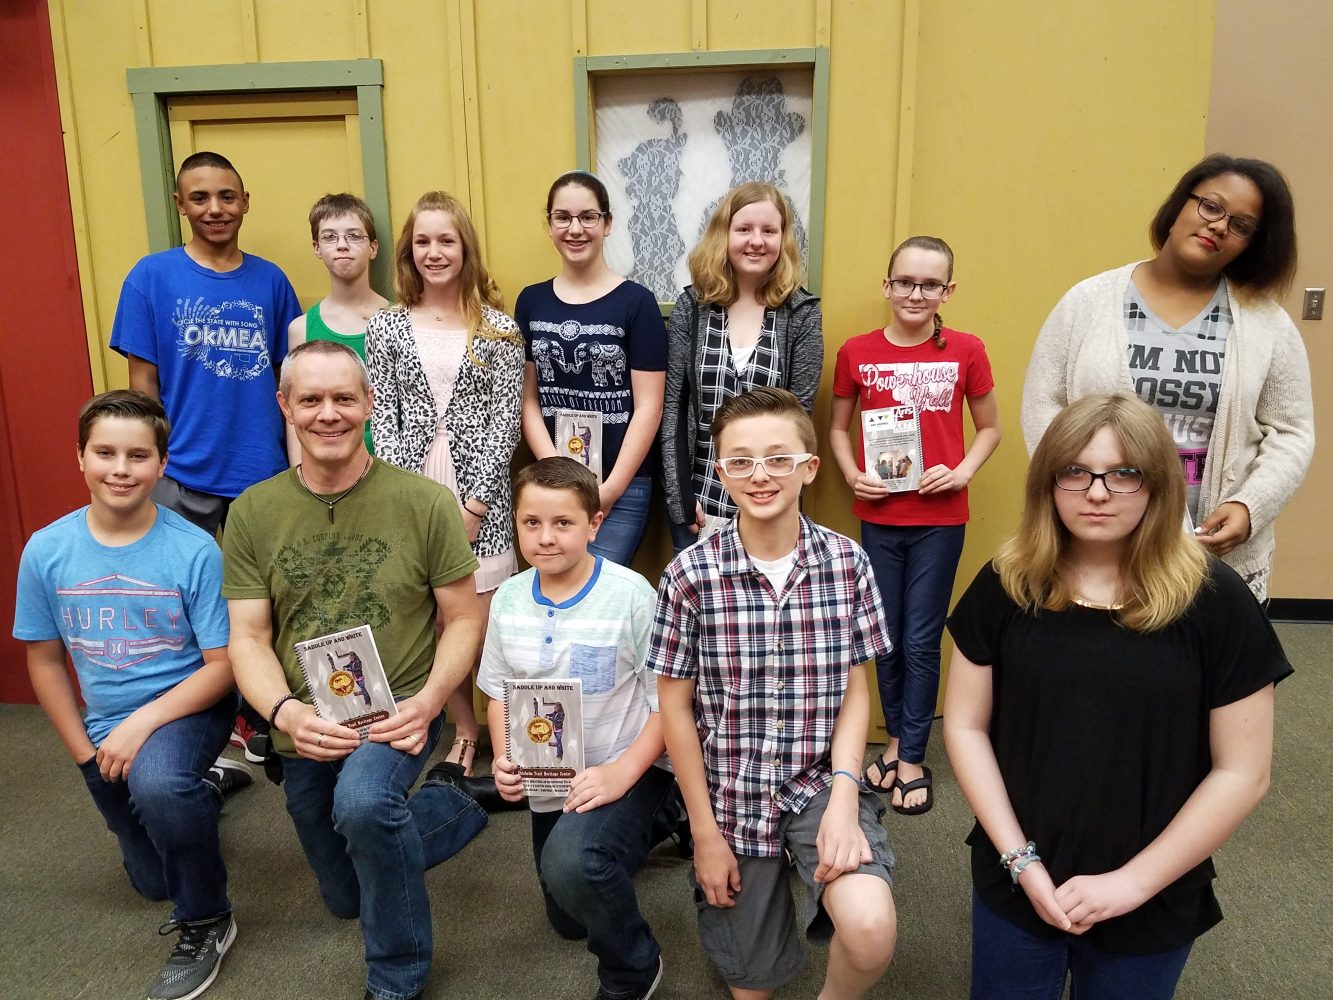 Duncan Middle School sixth-graders participated in a writing program at the Chisholm Trail Heritage Center. Those pictured with OU professor Nathan Brown include, front row from left, Drew Cook, Brown, Jordan Talley, Bryce Chambless, Autumn Boyles; back row: Cullen Stevens, Bradley Hill, Sheridan White, Sophia Marsh, Bryanna Smith, Ariiana Montoya and Alson Cartwright.